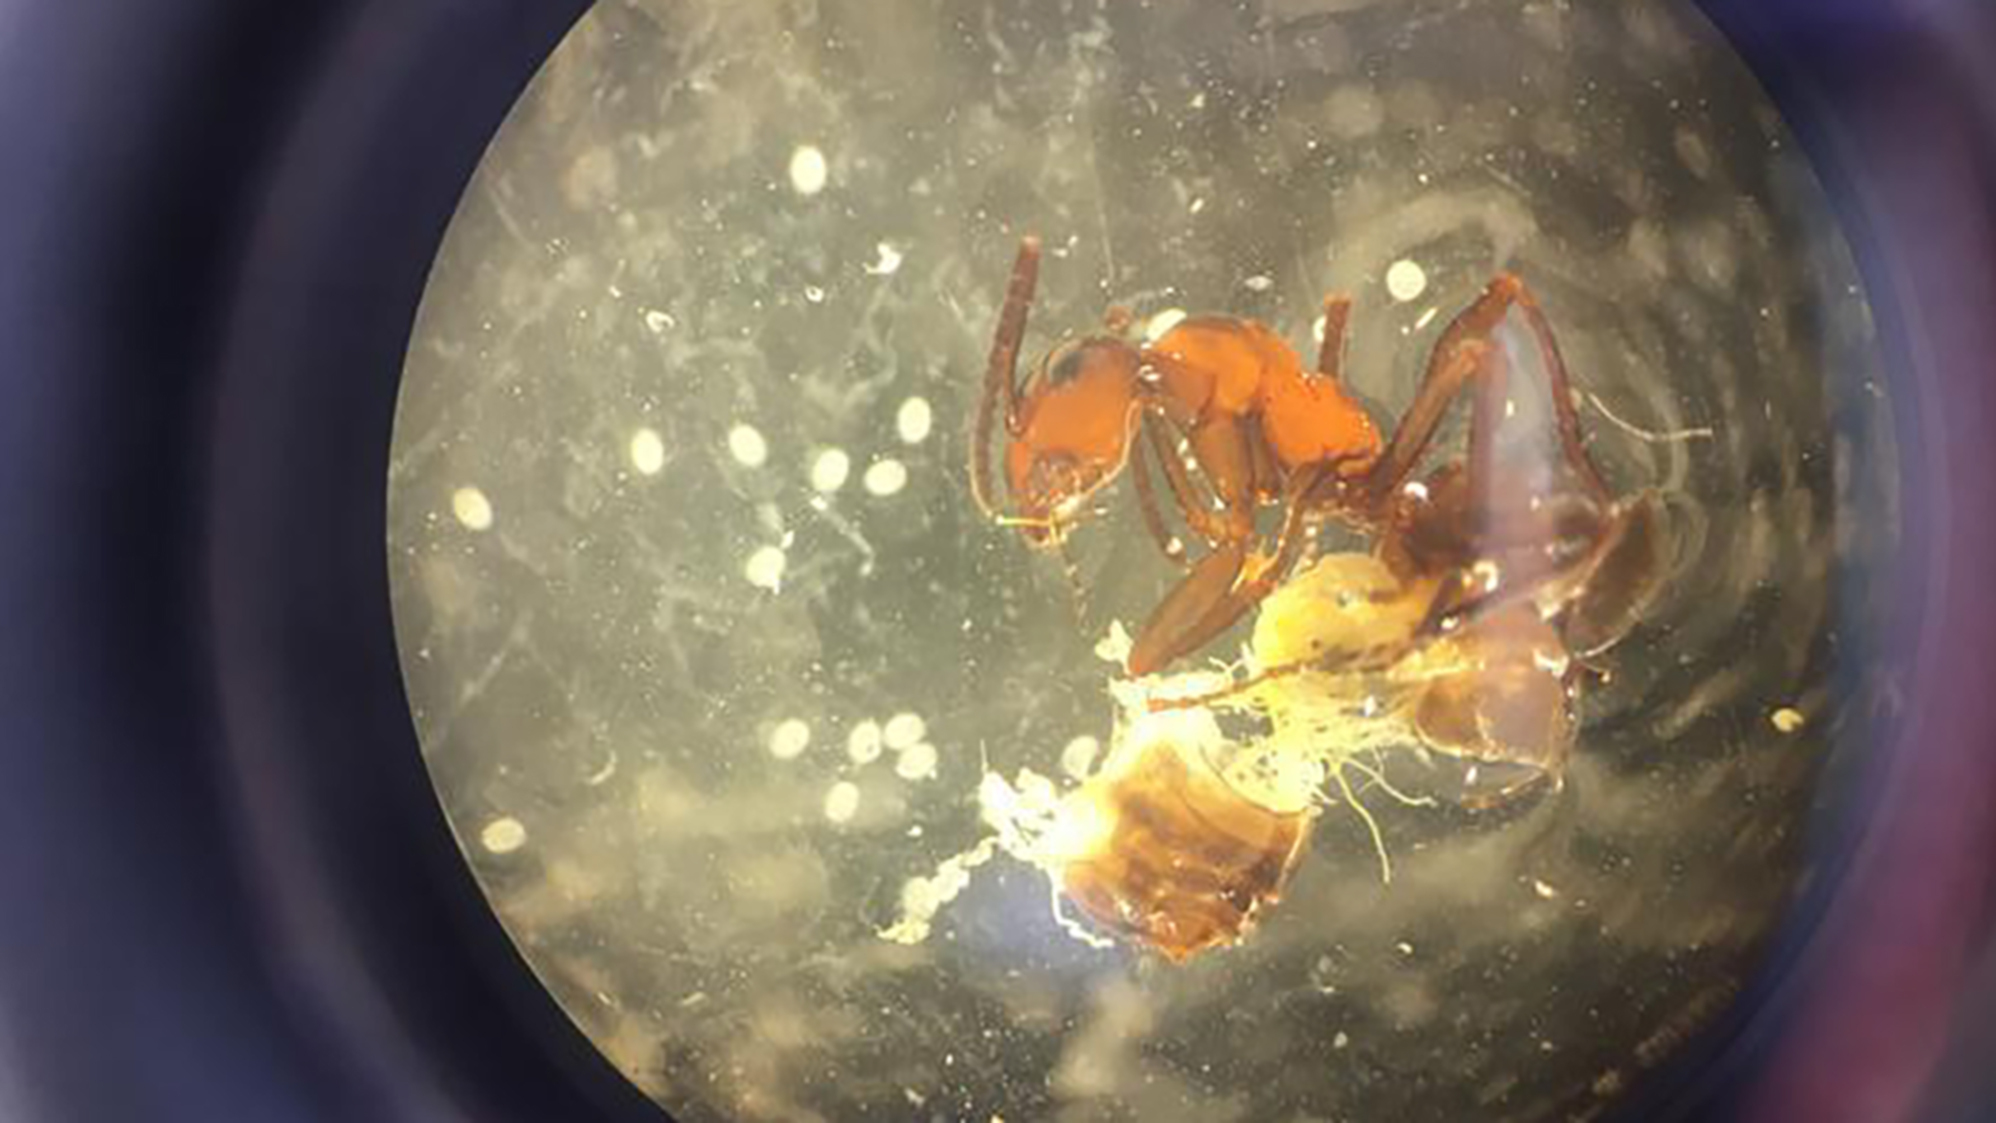 A dissected ant and where you can see the encapsulated parasites (white oval structures) spilling out of the hind body.